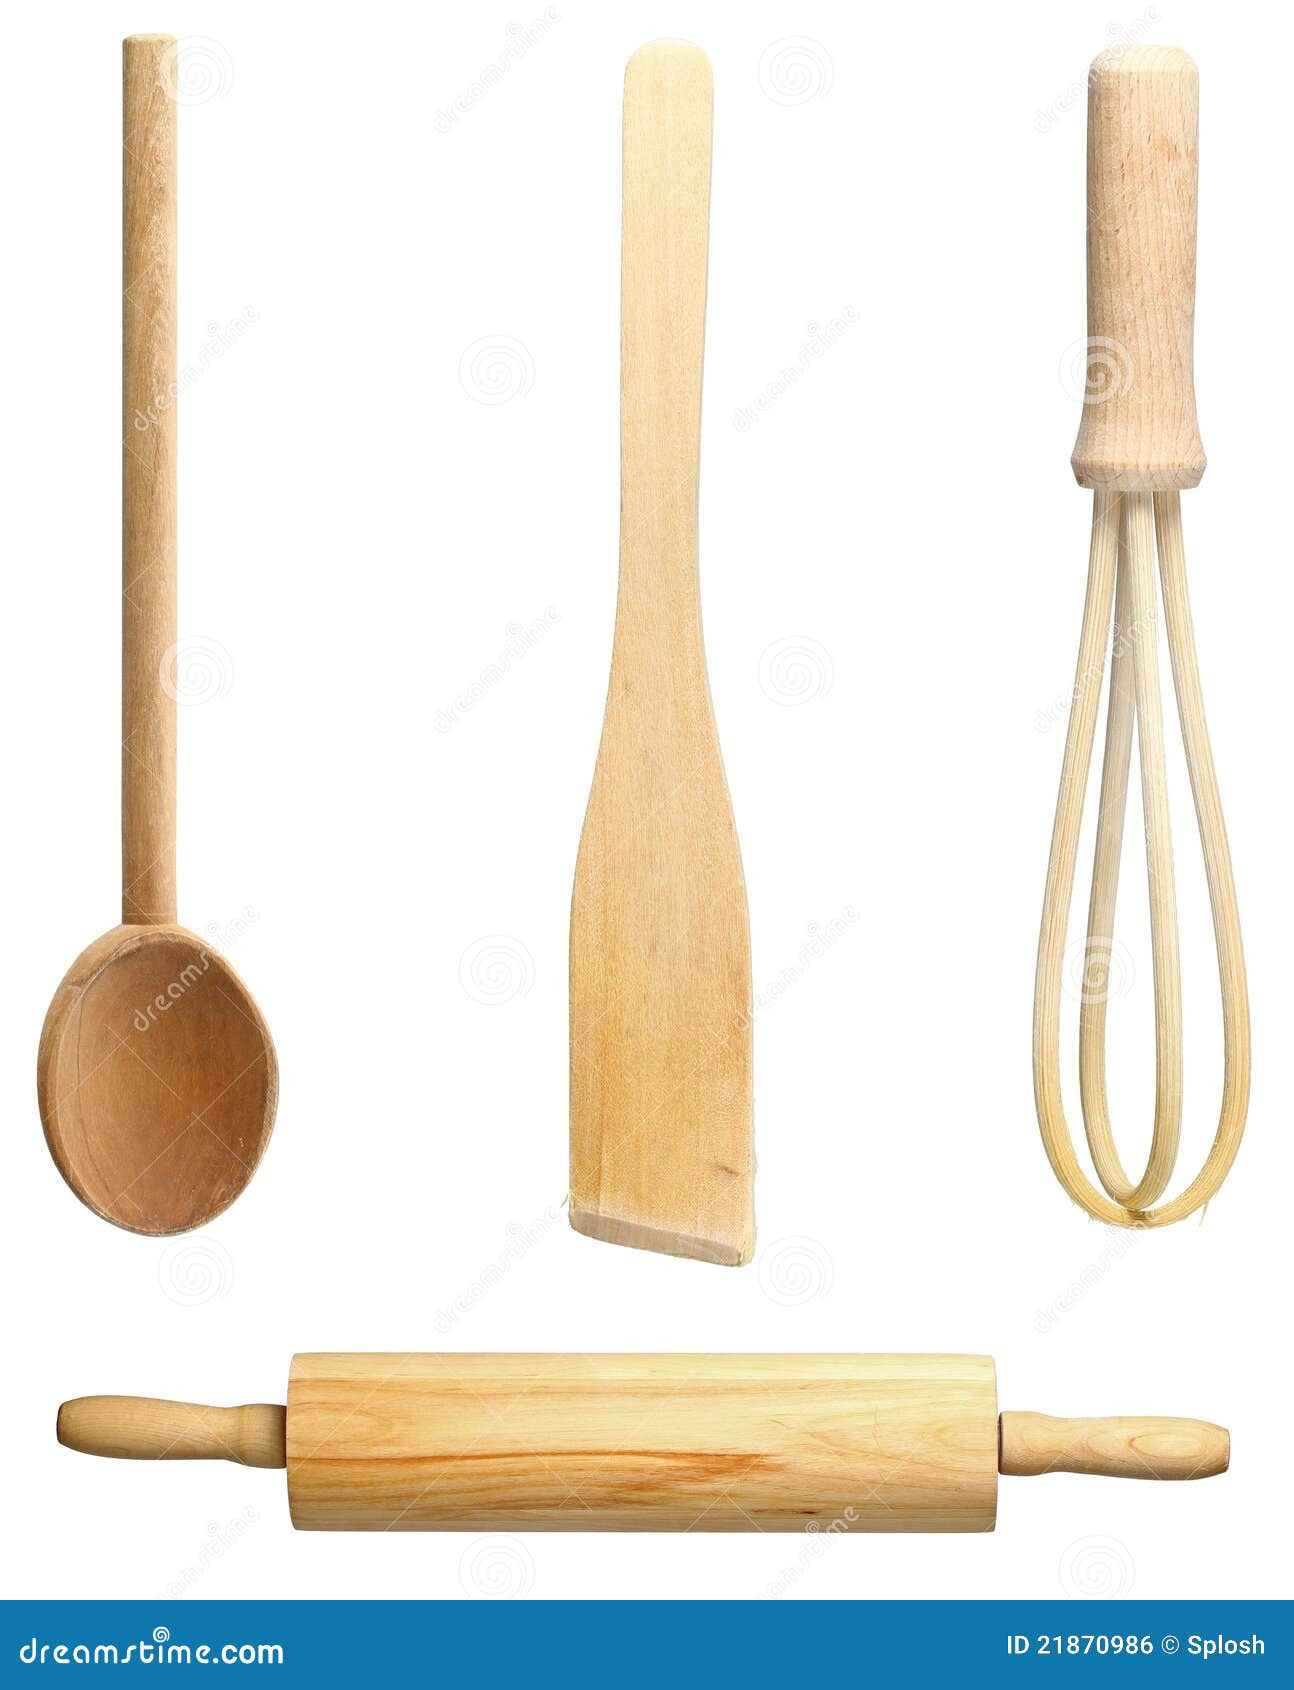 Four different wooden kitchen utensils isolated on a white background.